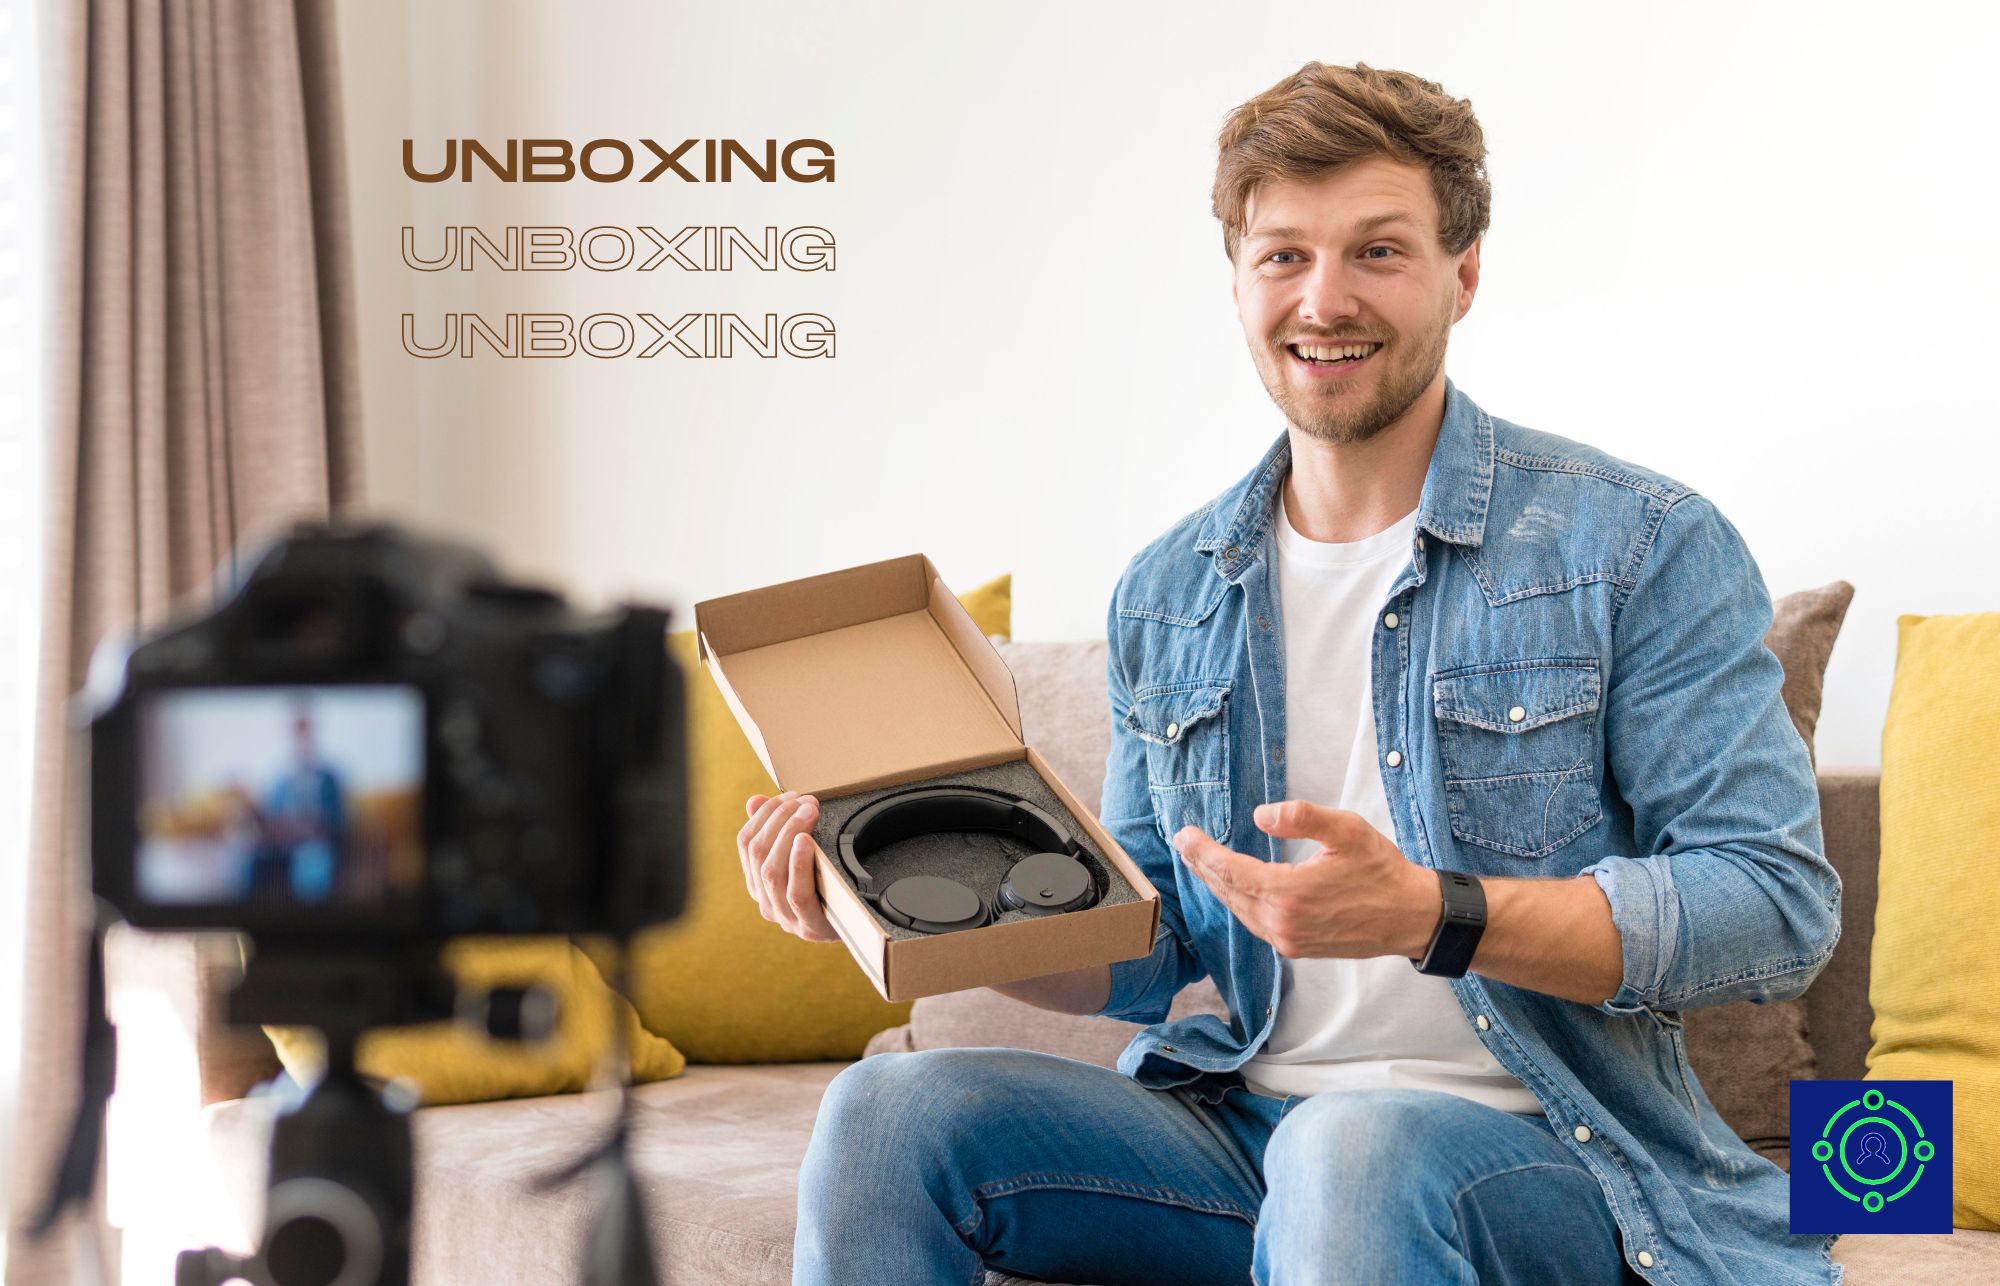 Unboxing-videos in affiliate marketing